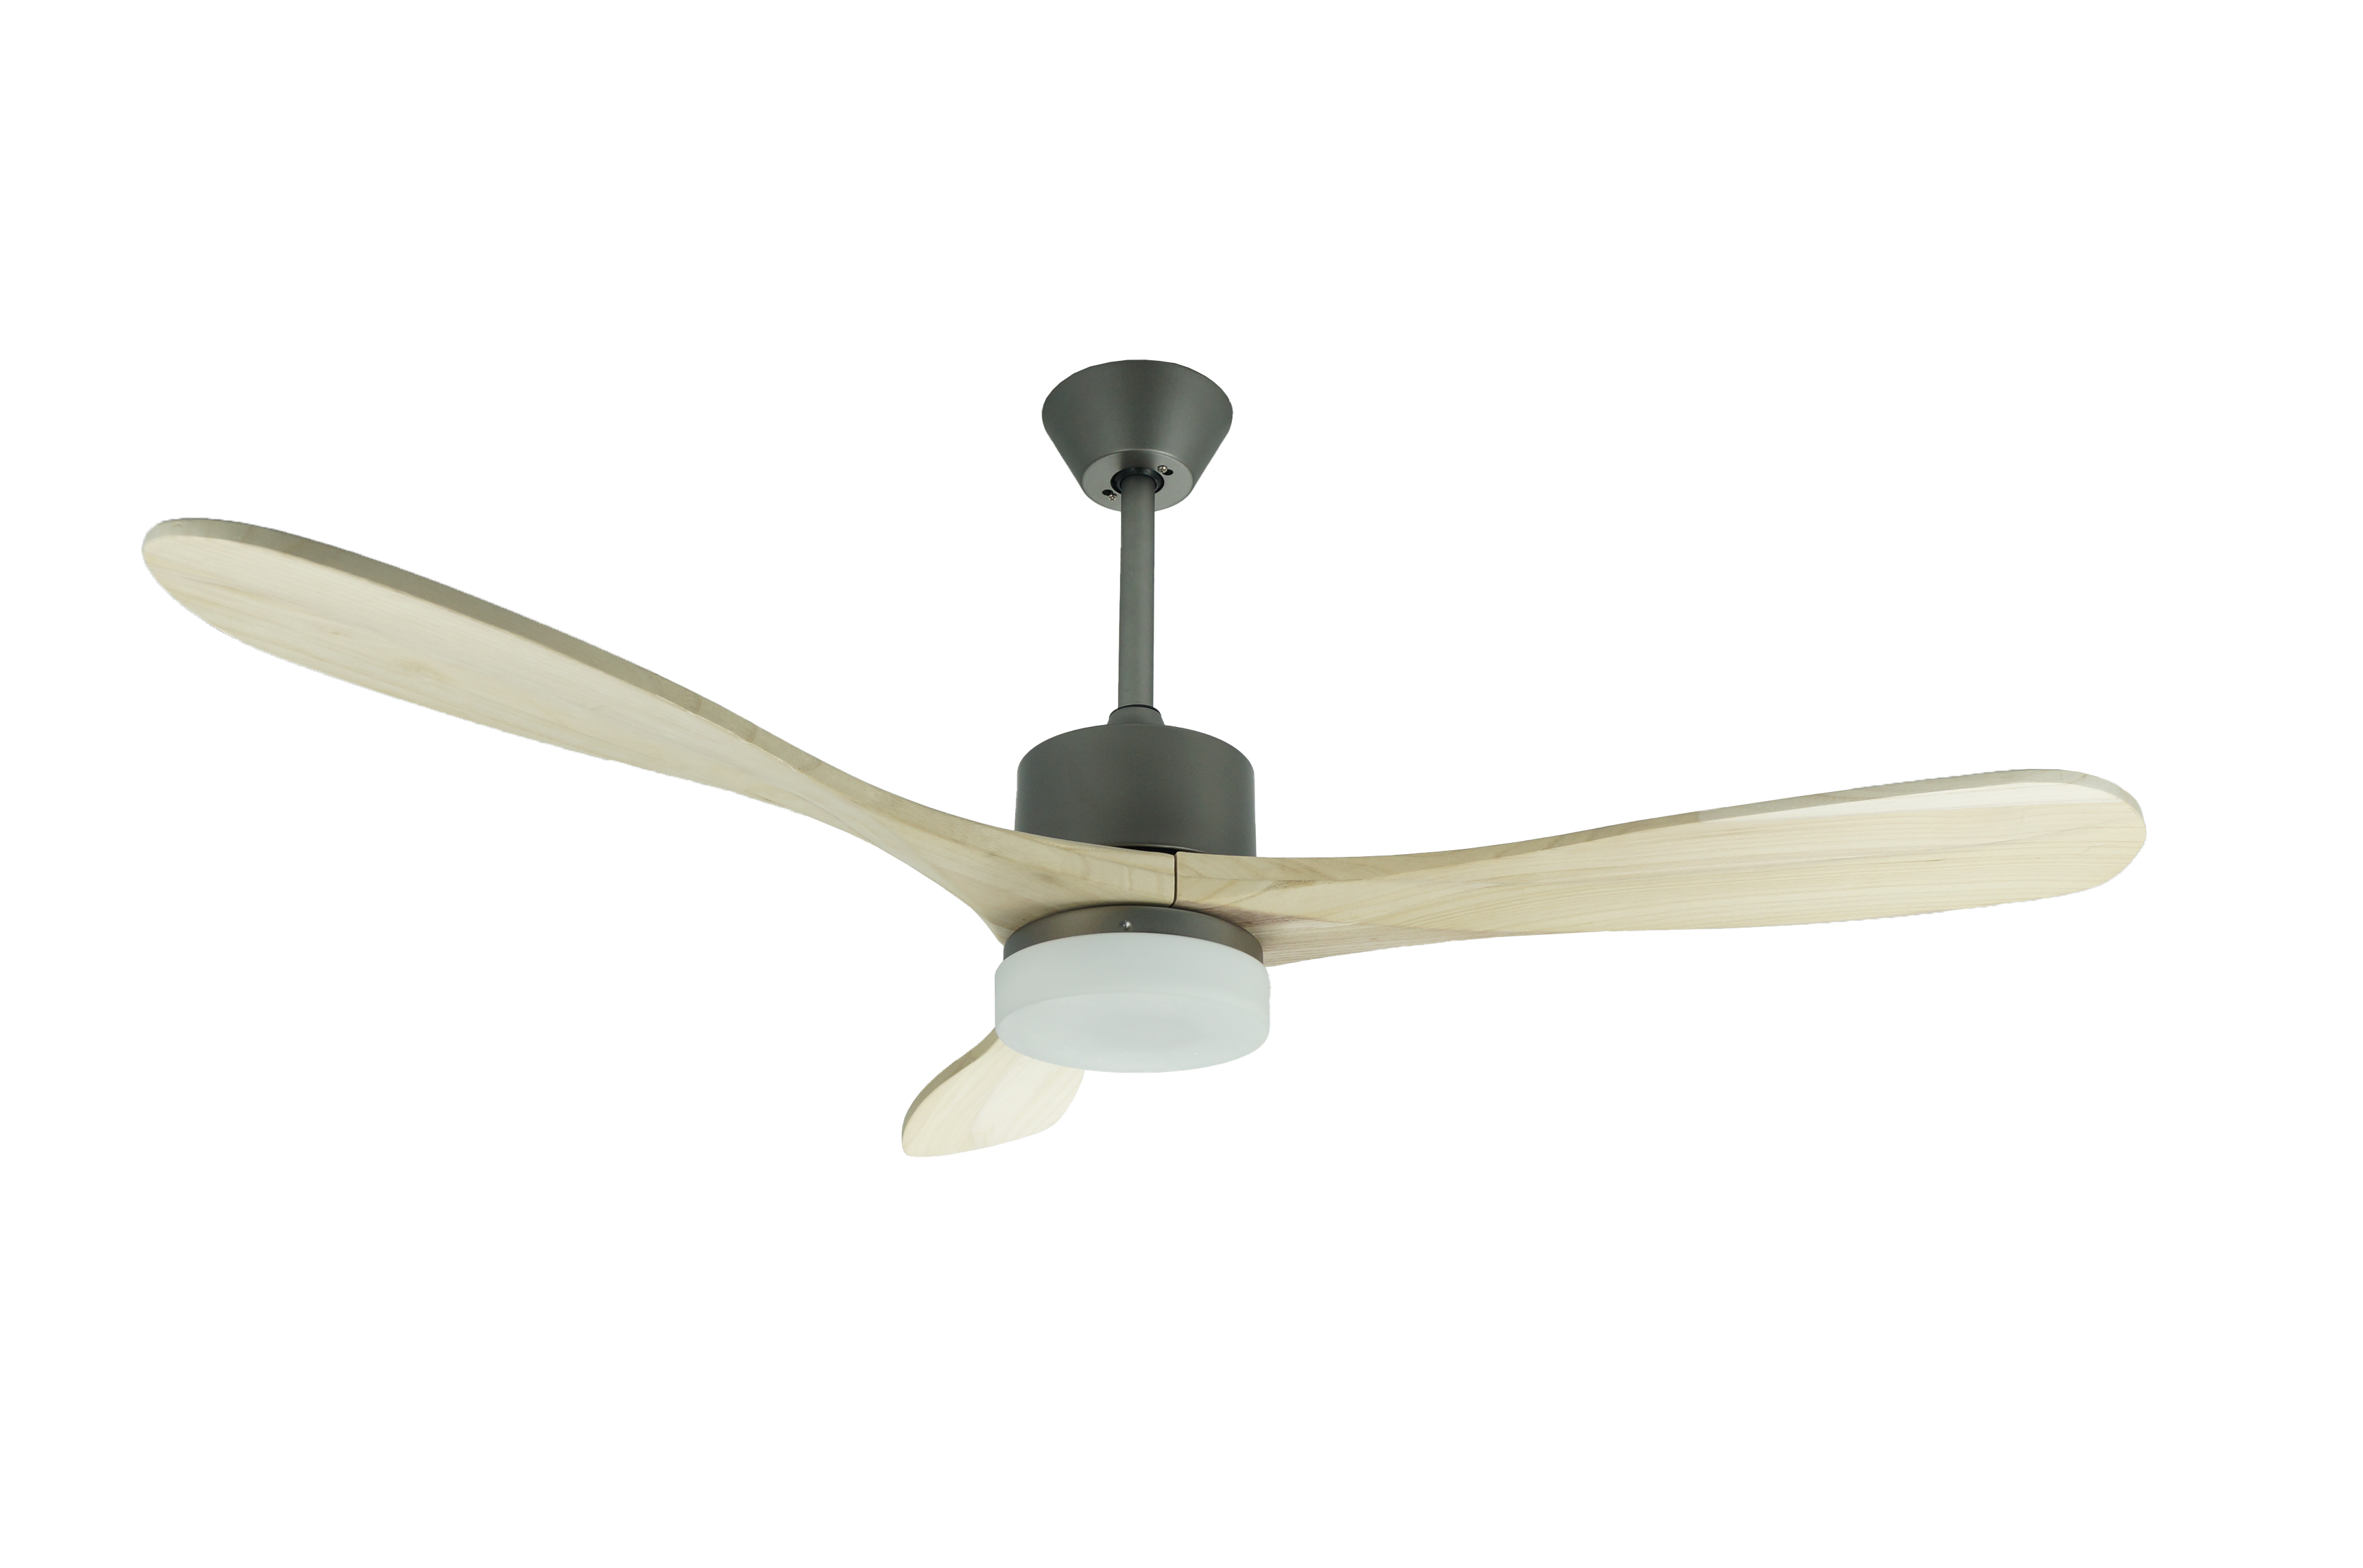 Airbena High-end Modern Home Style 52 Inch Gray Color Hot Sale Ceiling Fan with Remote Control 